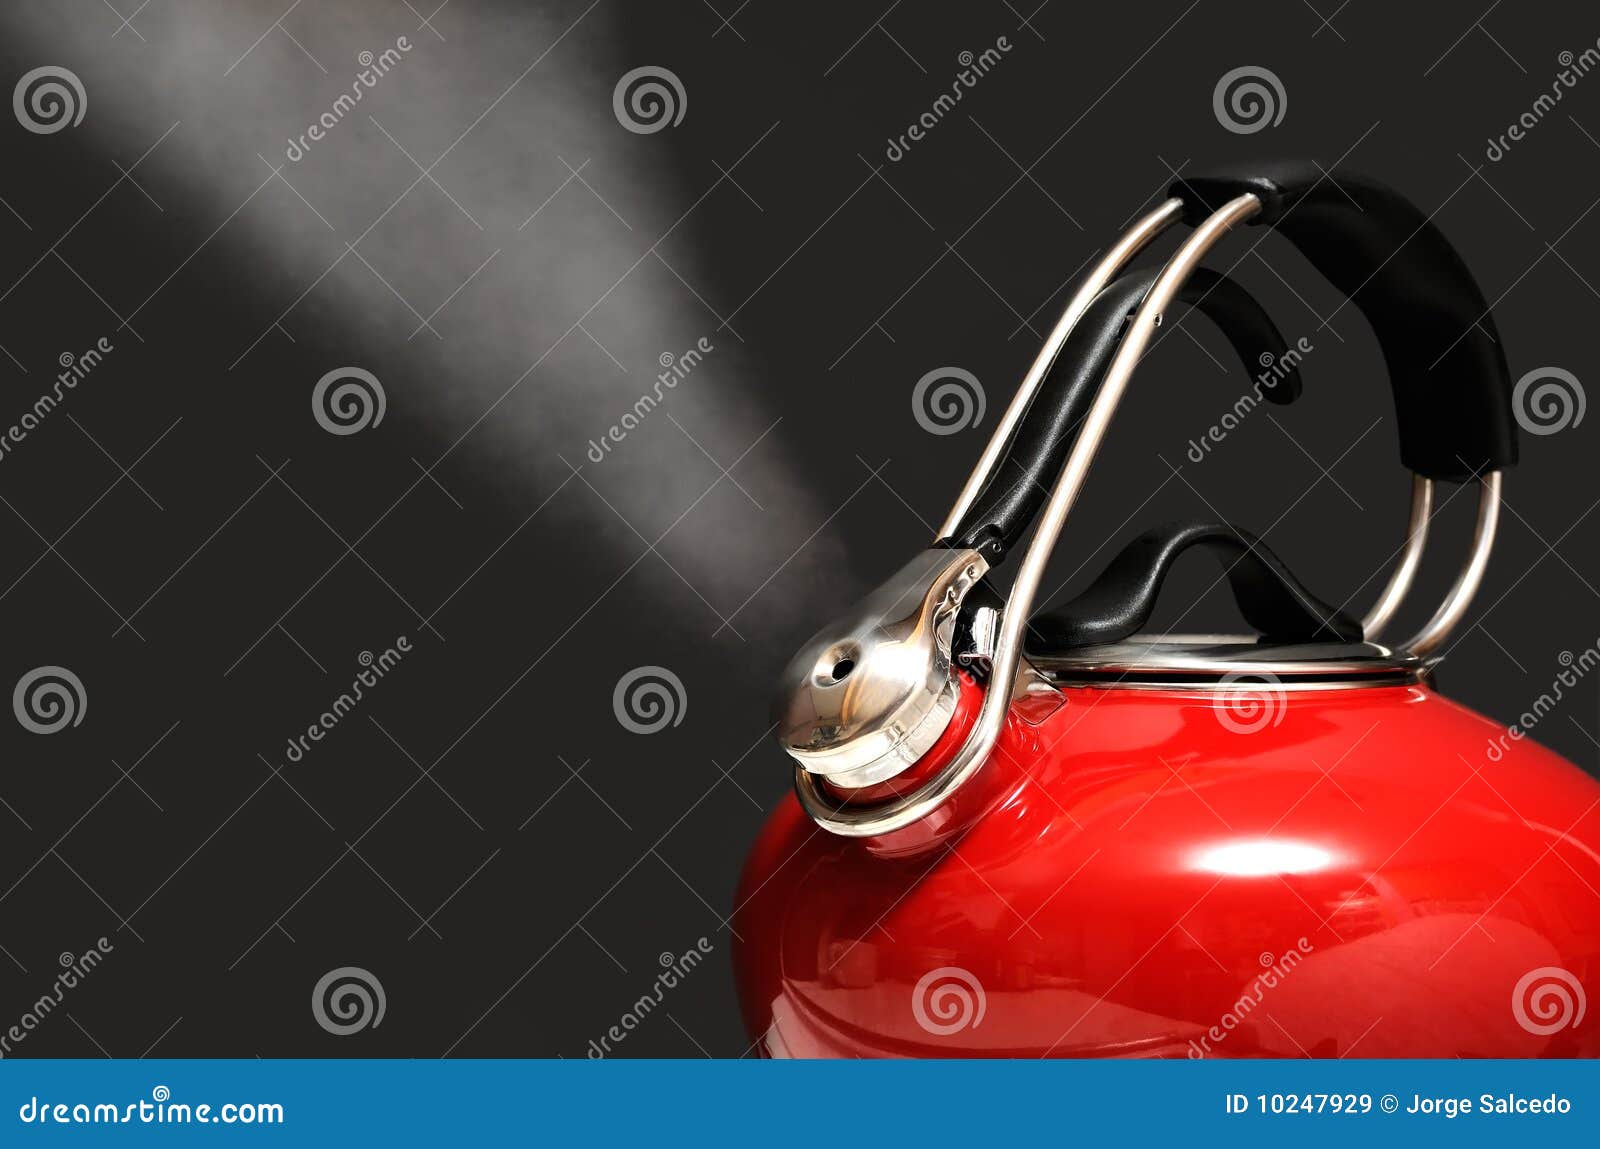 https://thumbs.dreamstime.com/z/red-kettle-boiling-isolated-black-10247929.jpg